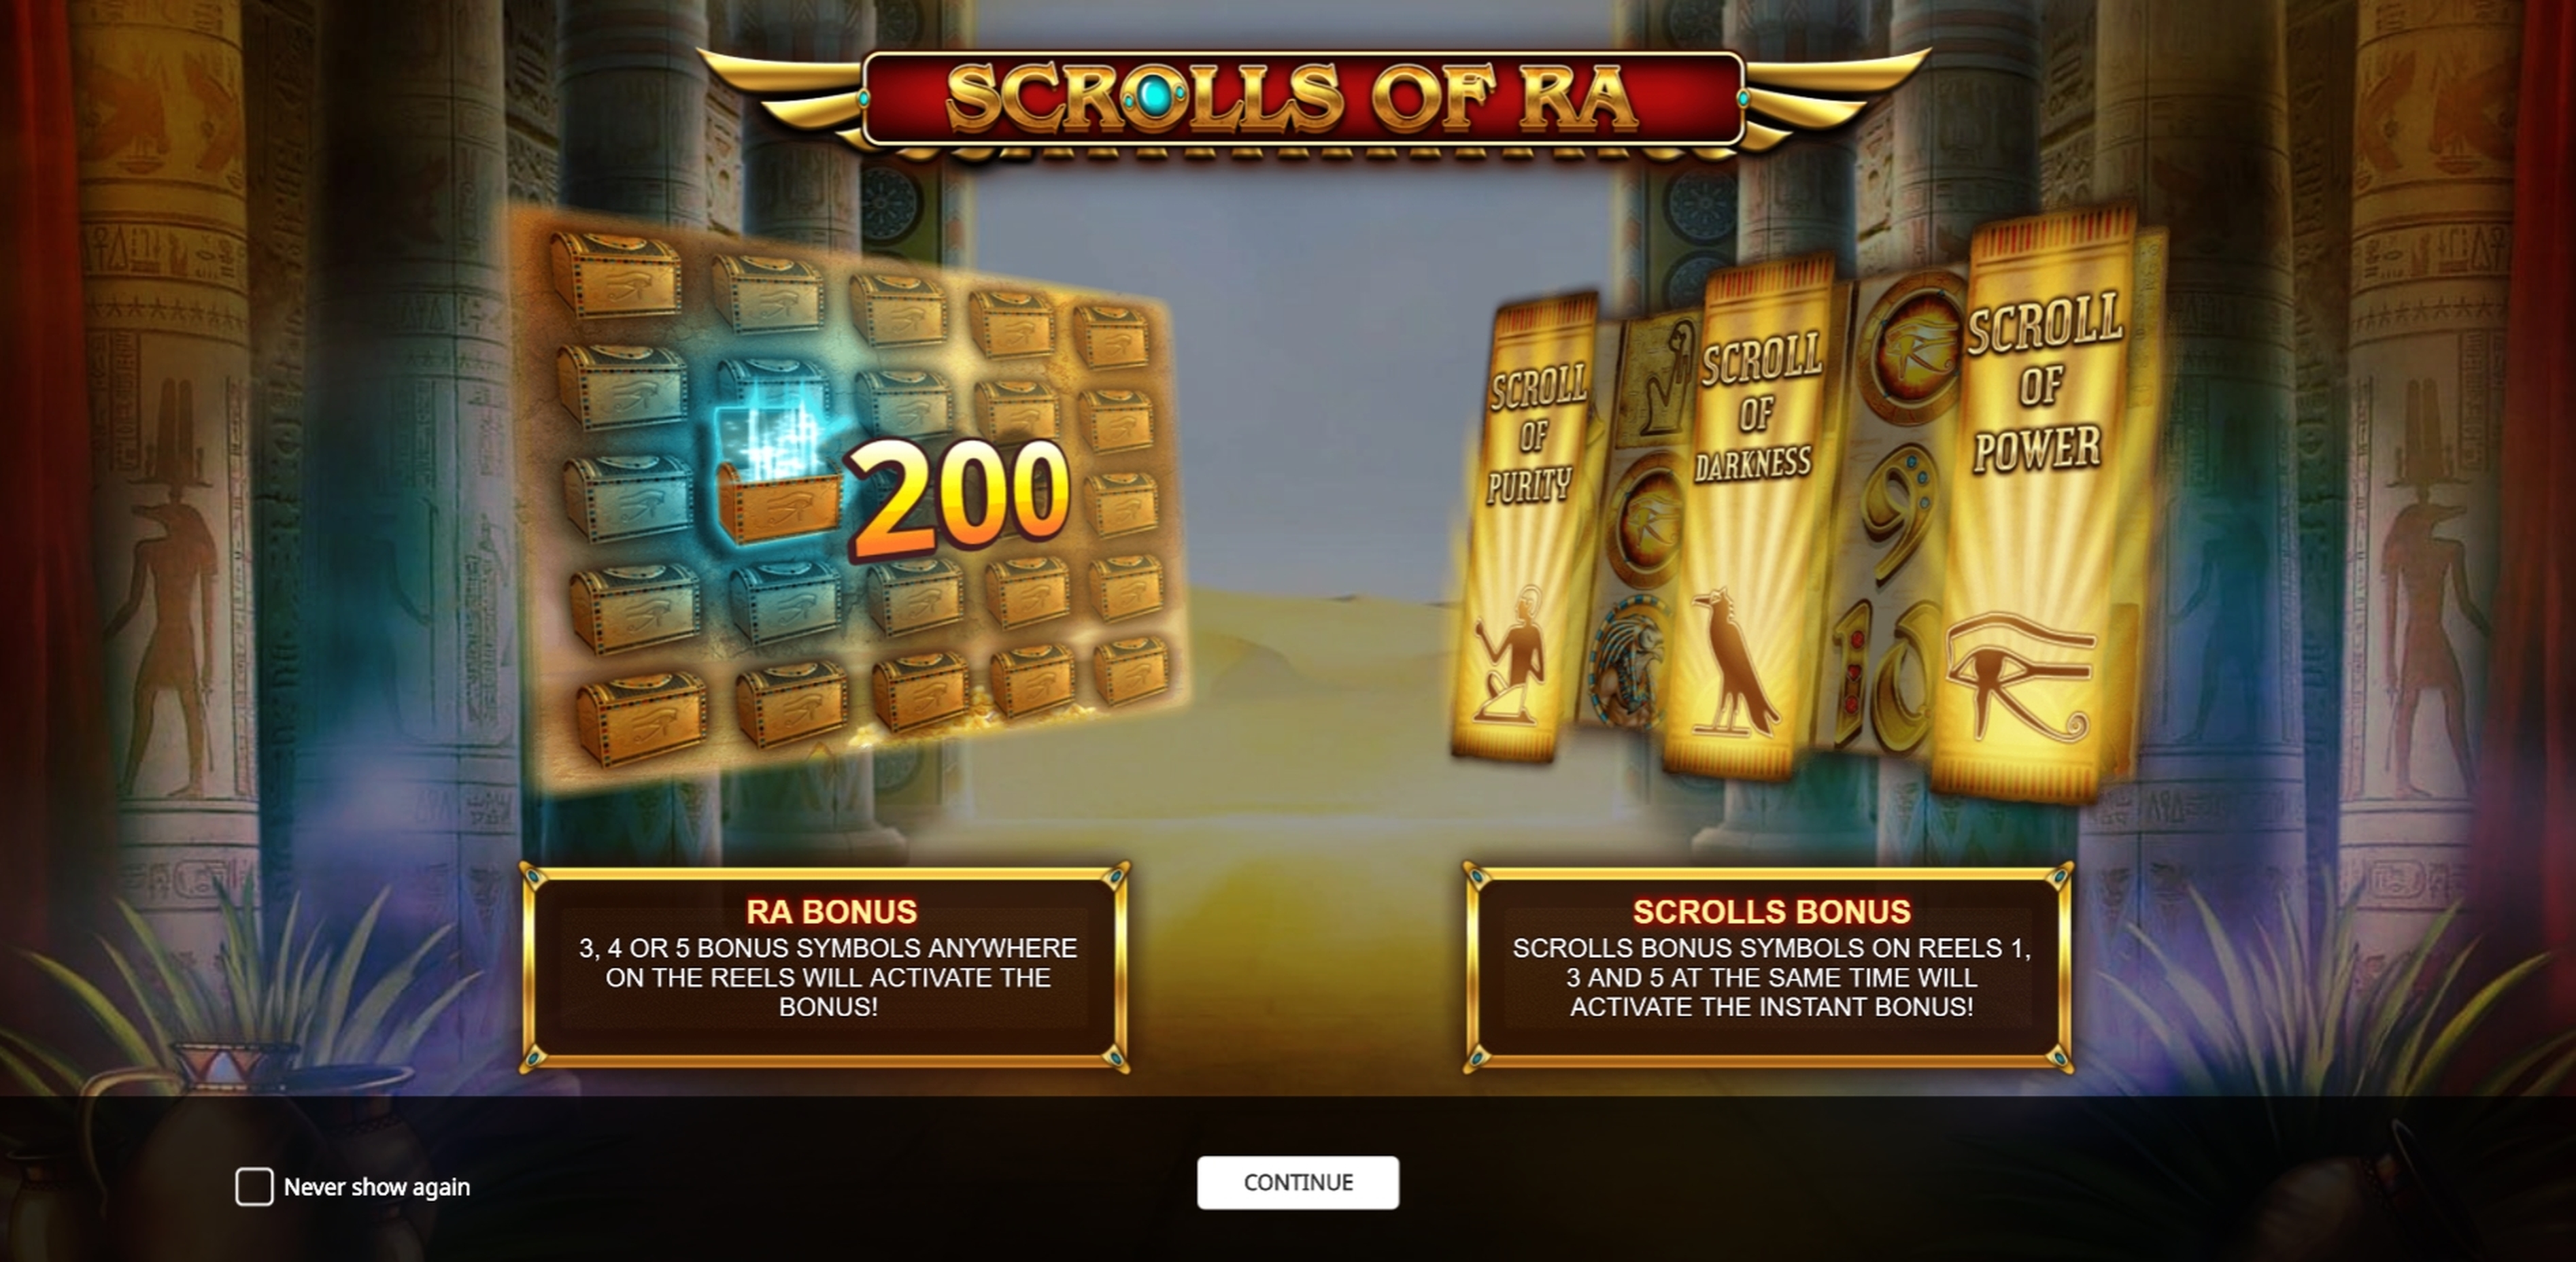 Play Scrolls of RA Free Casino Slot Game by iSoftBet